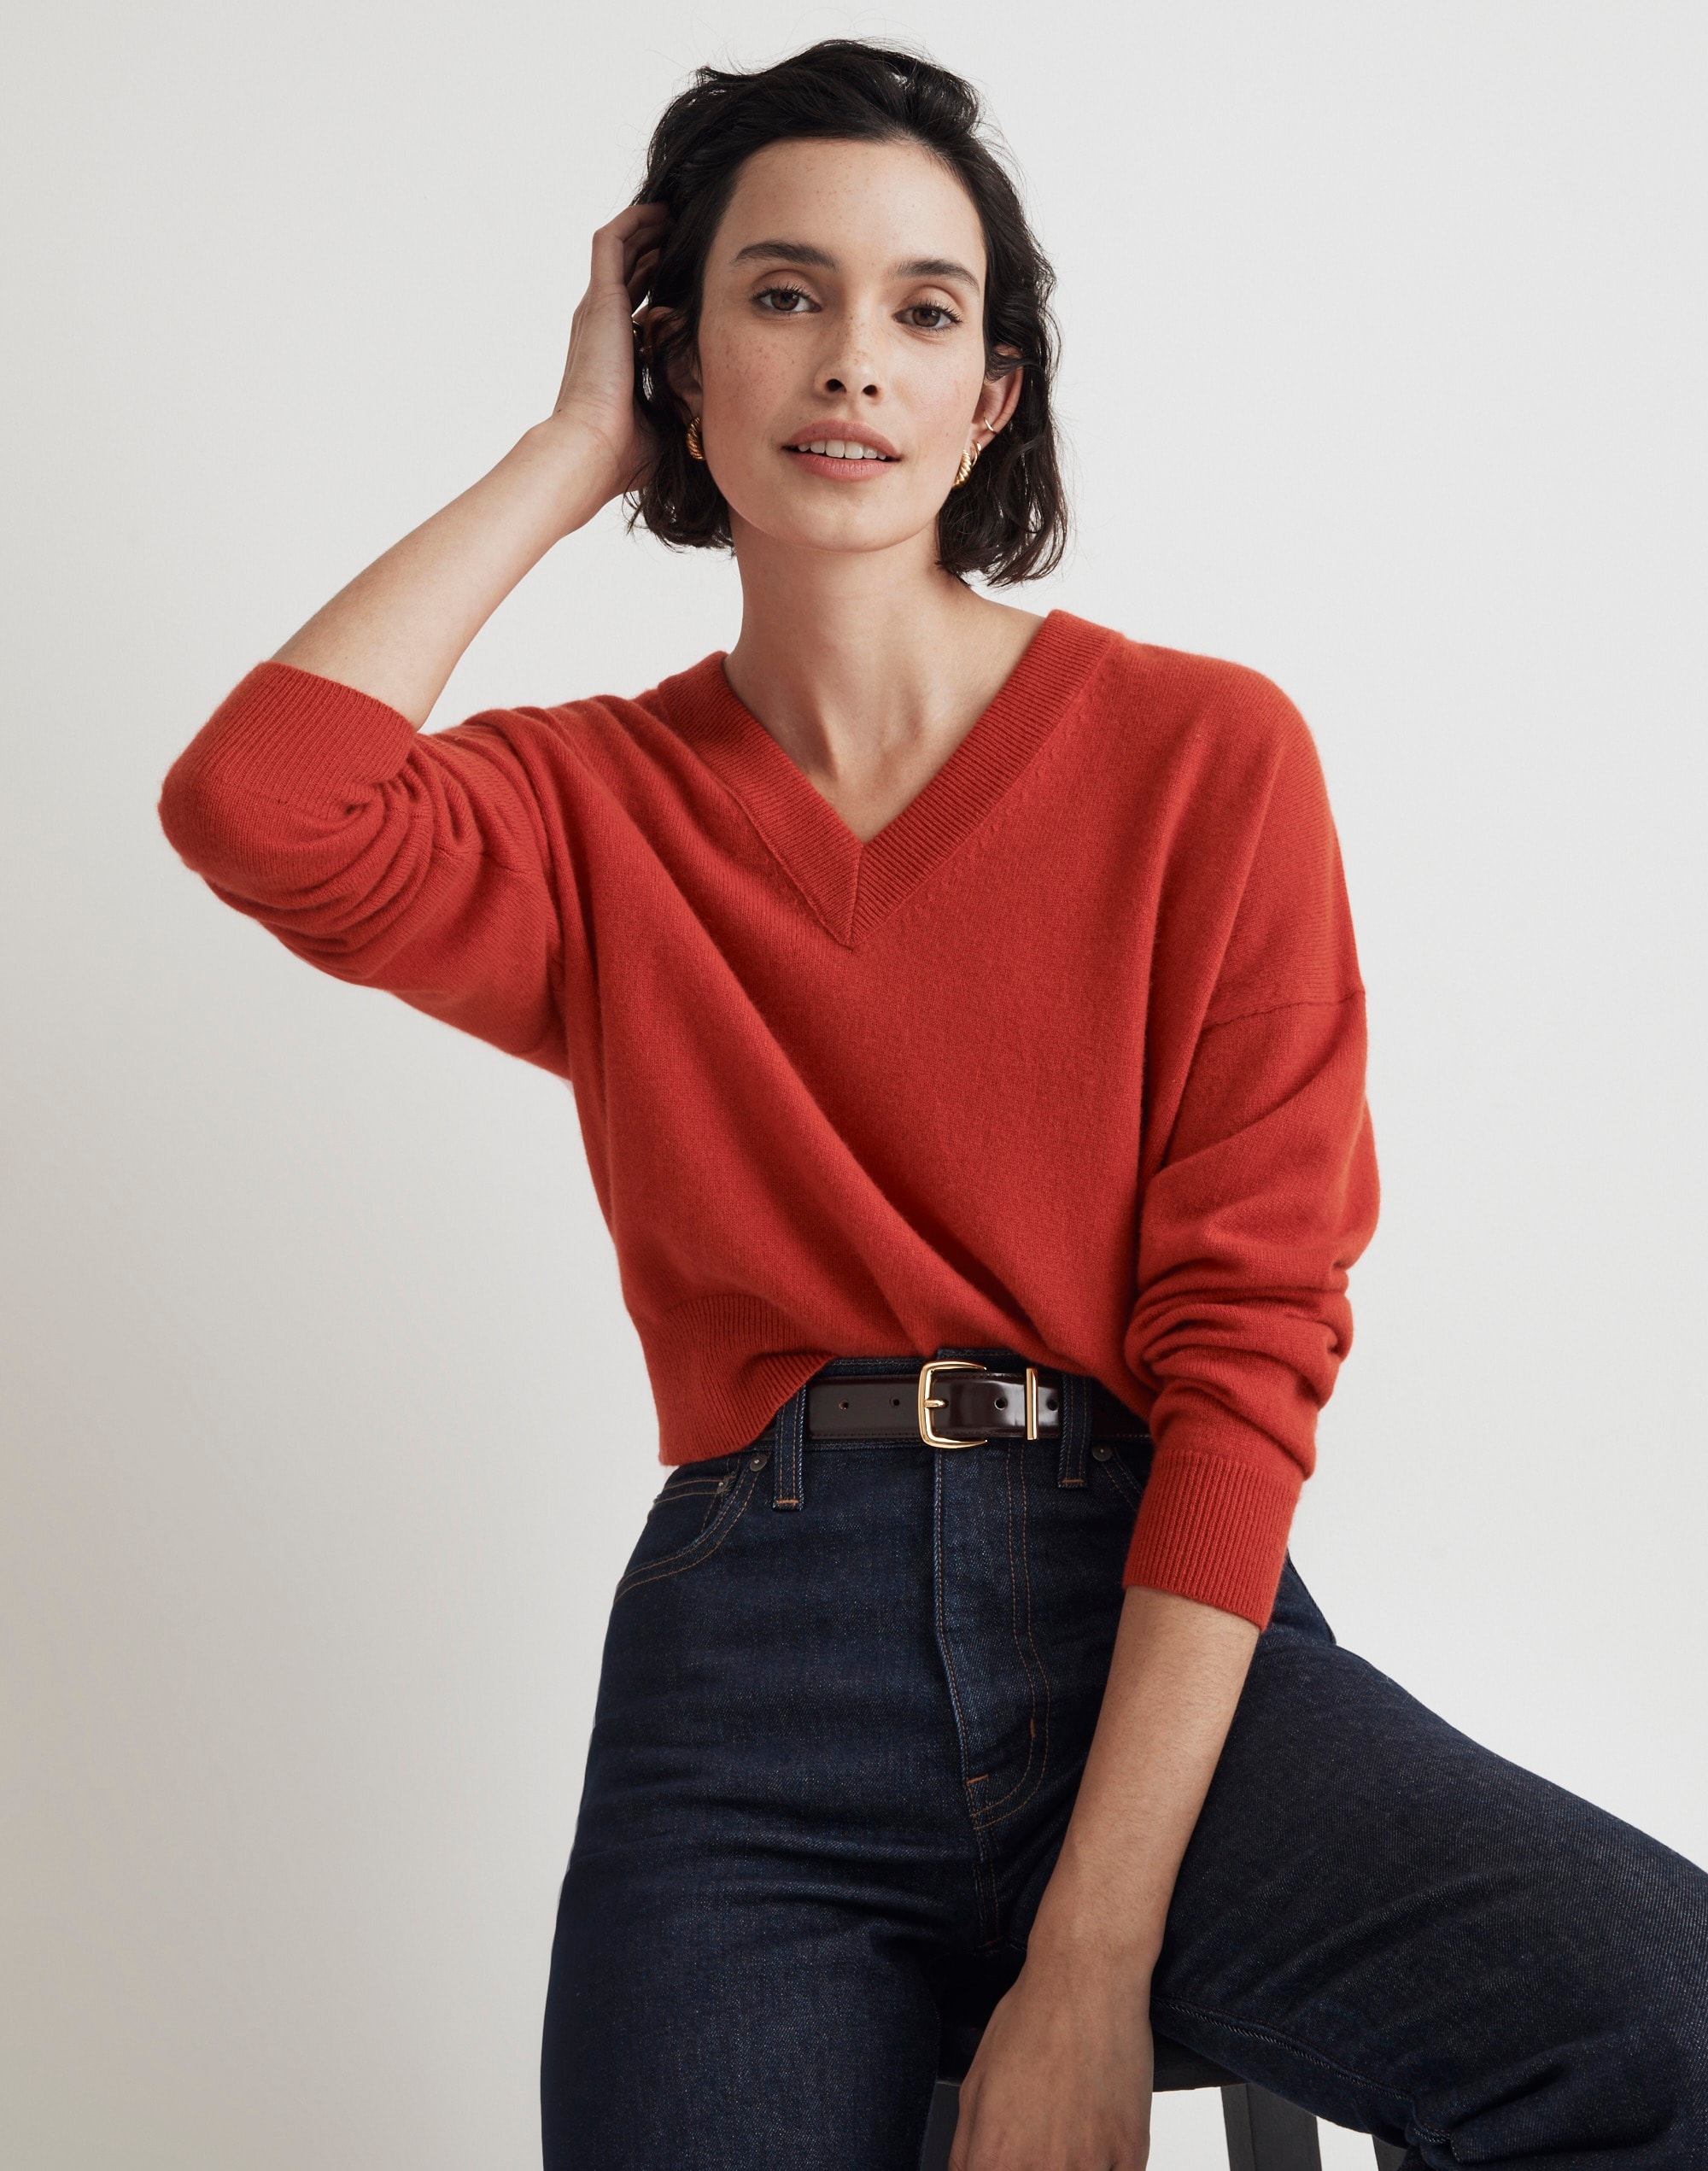 Madewell | Jeans, Clothing, Shoes & Bags for Women and Men